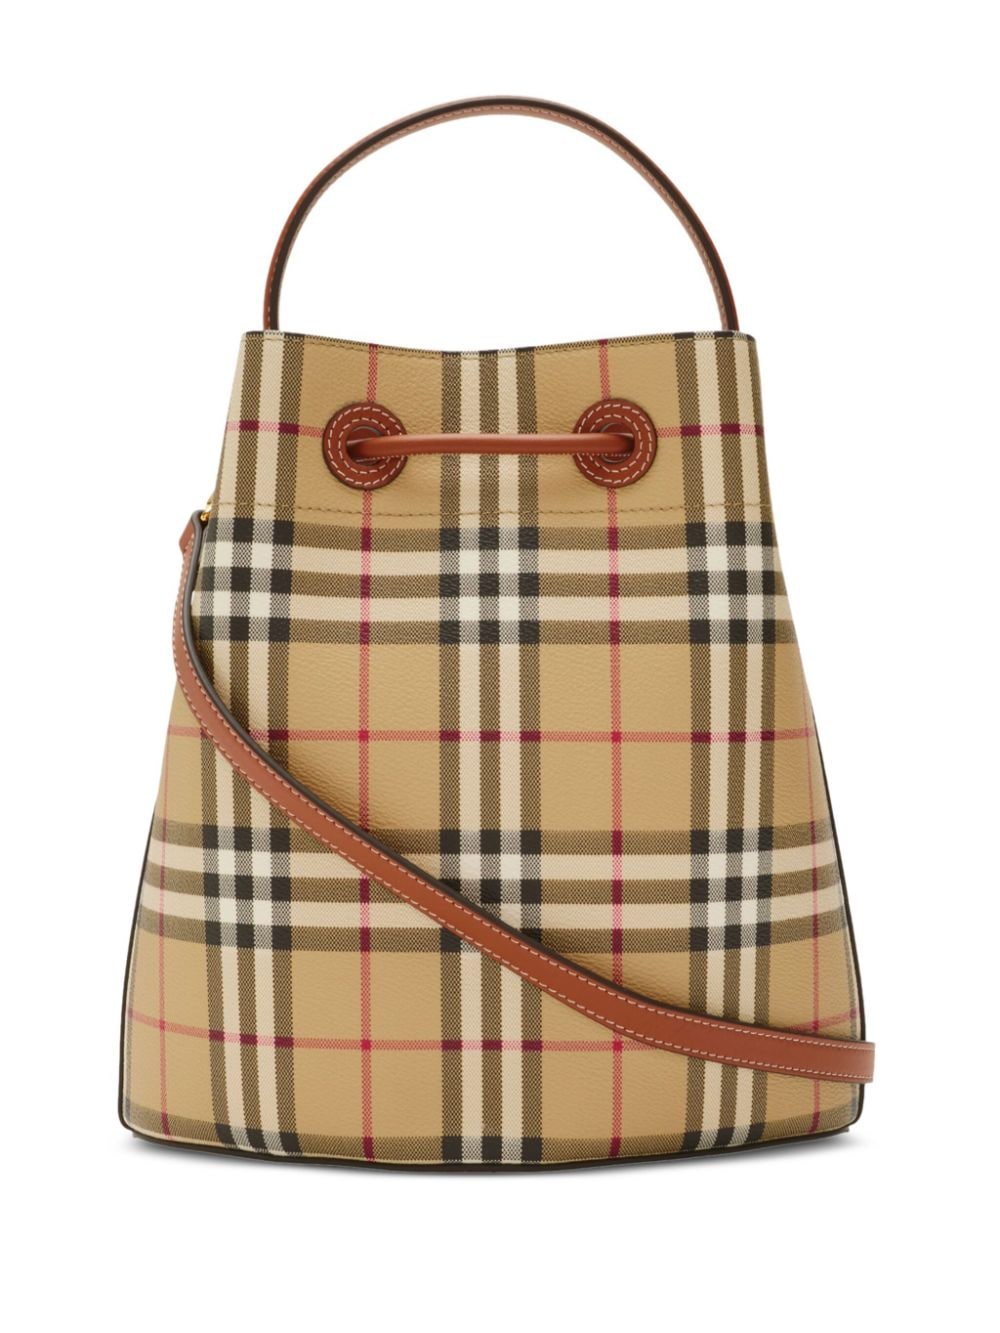 Burberry small TB leather bucket bag - Beige